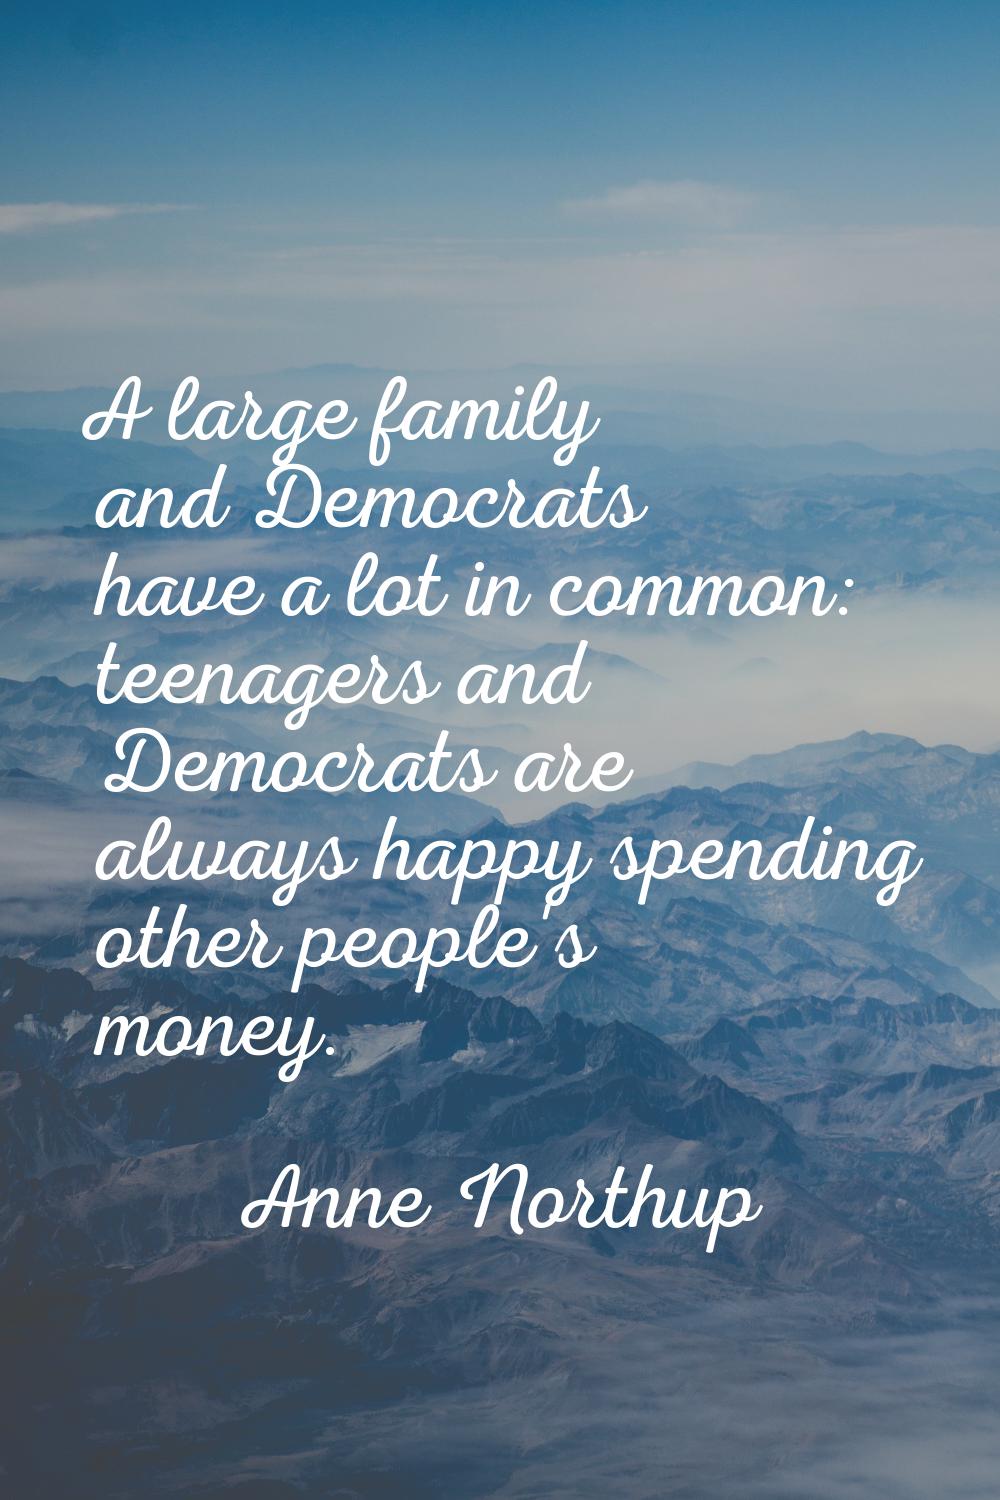 A large family and Democrats have a lot in common: teenagers and Democrats are always happy spendin